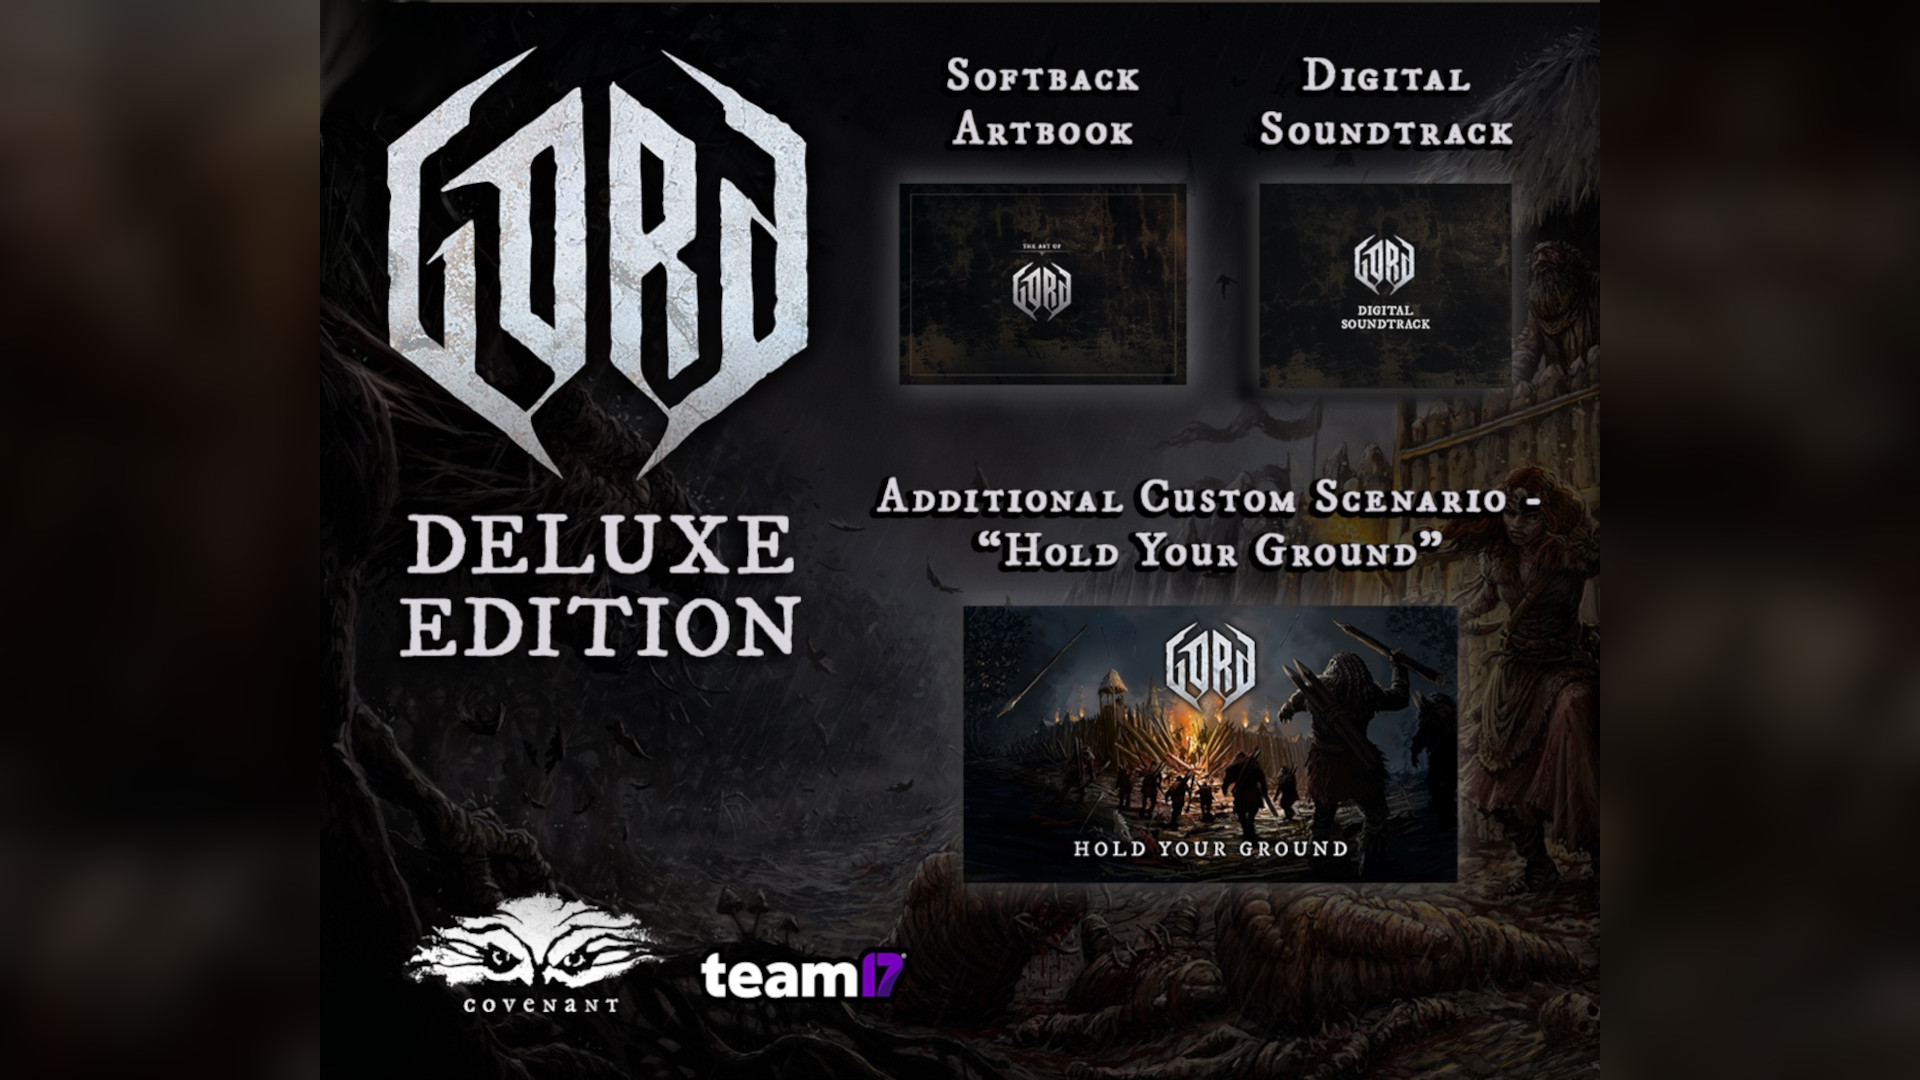 Gord Deluxe Edition Steam CD Key 17.48 $